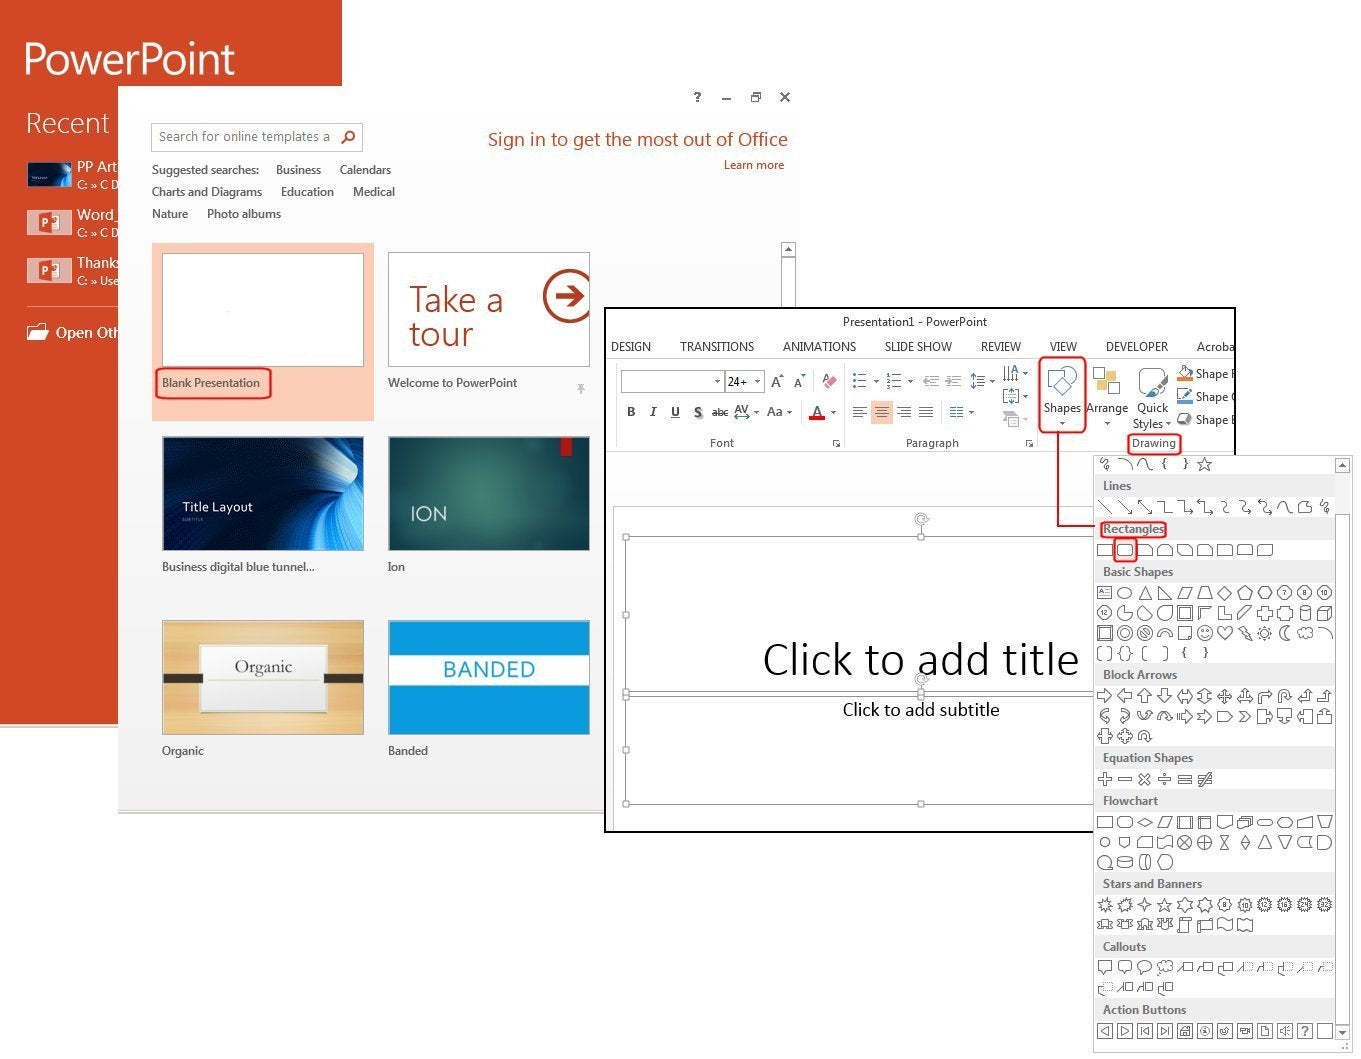 Ppt Формат. Format Shape POWERPOINT. Формат рисунка в POWERPOINT. QPT POWERPOINT.